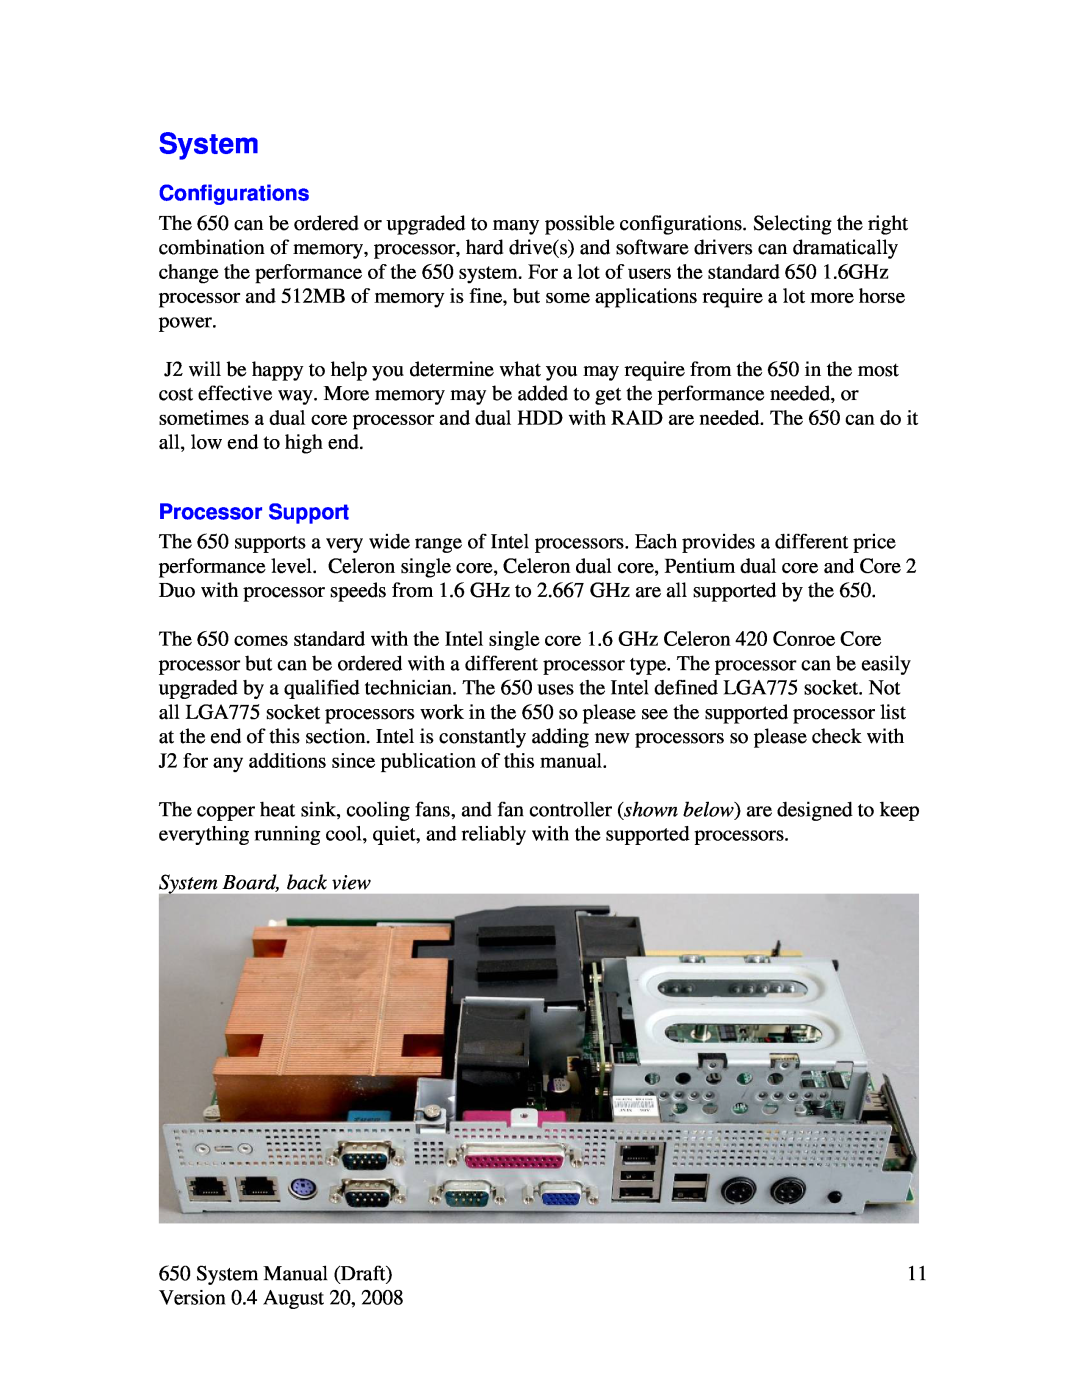 Intel J2 650 system manual Configurations, Processor Support, System Board, back view 